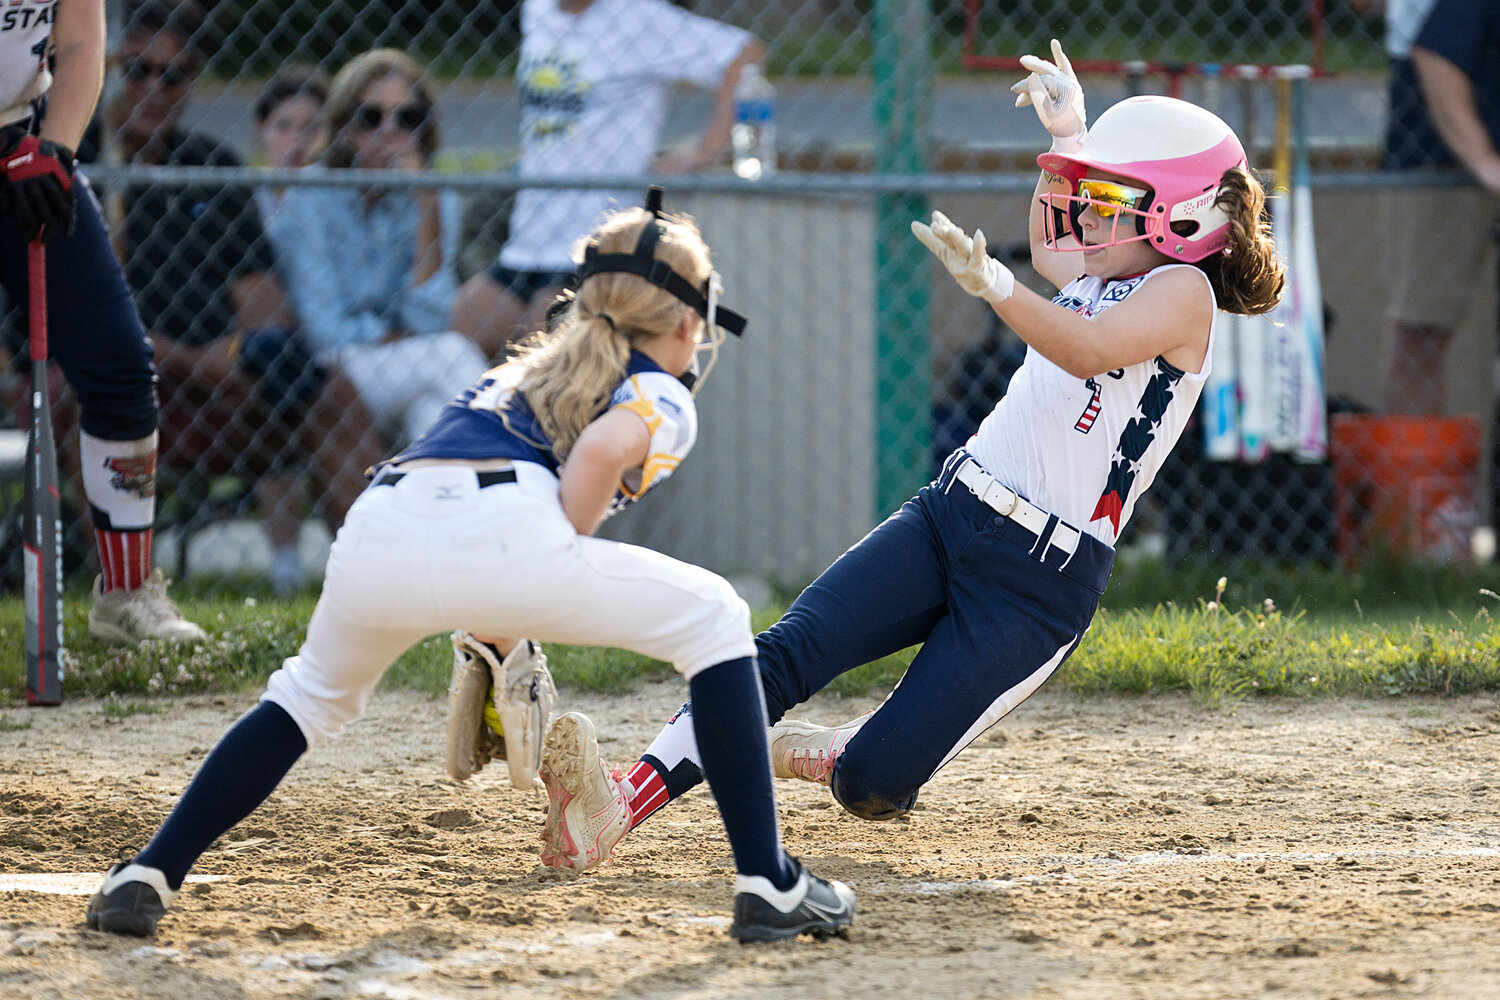 Sofie Gill slides into home plate.